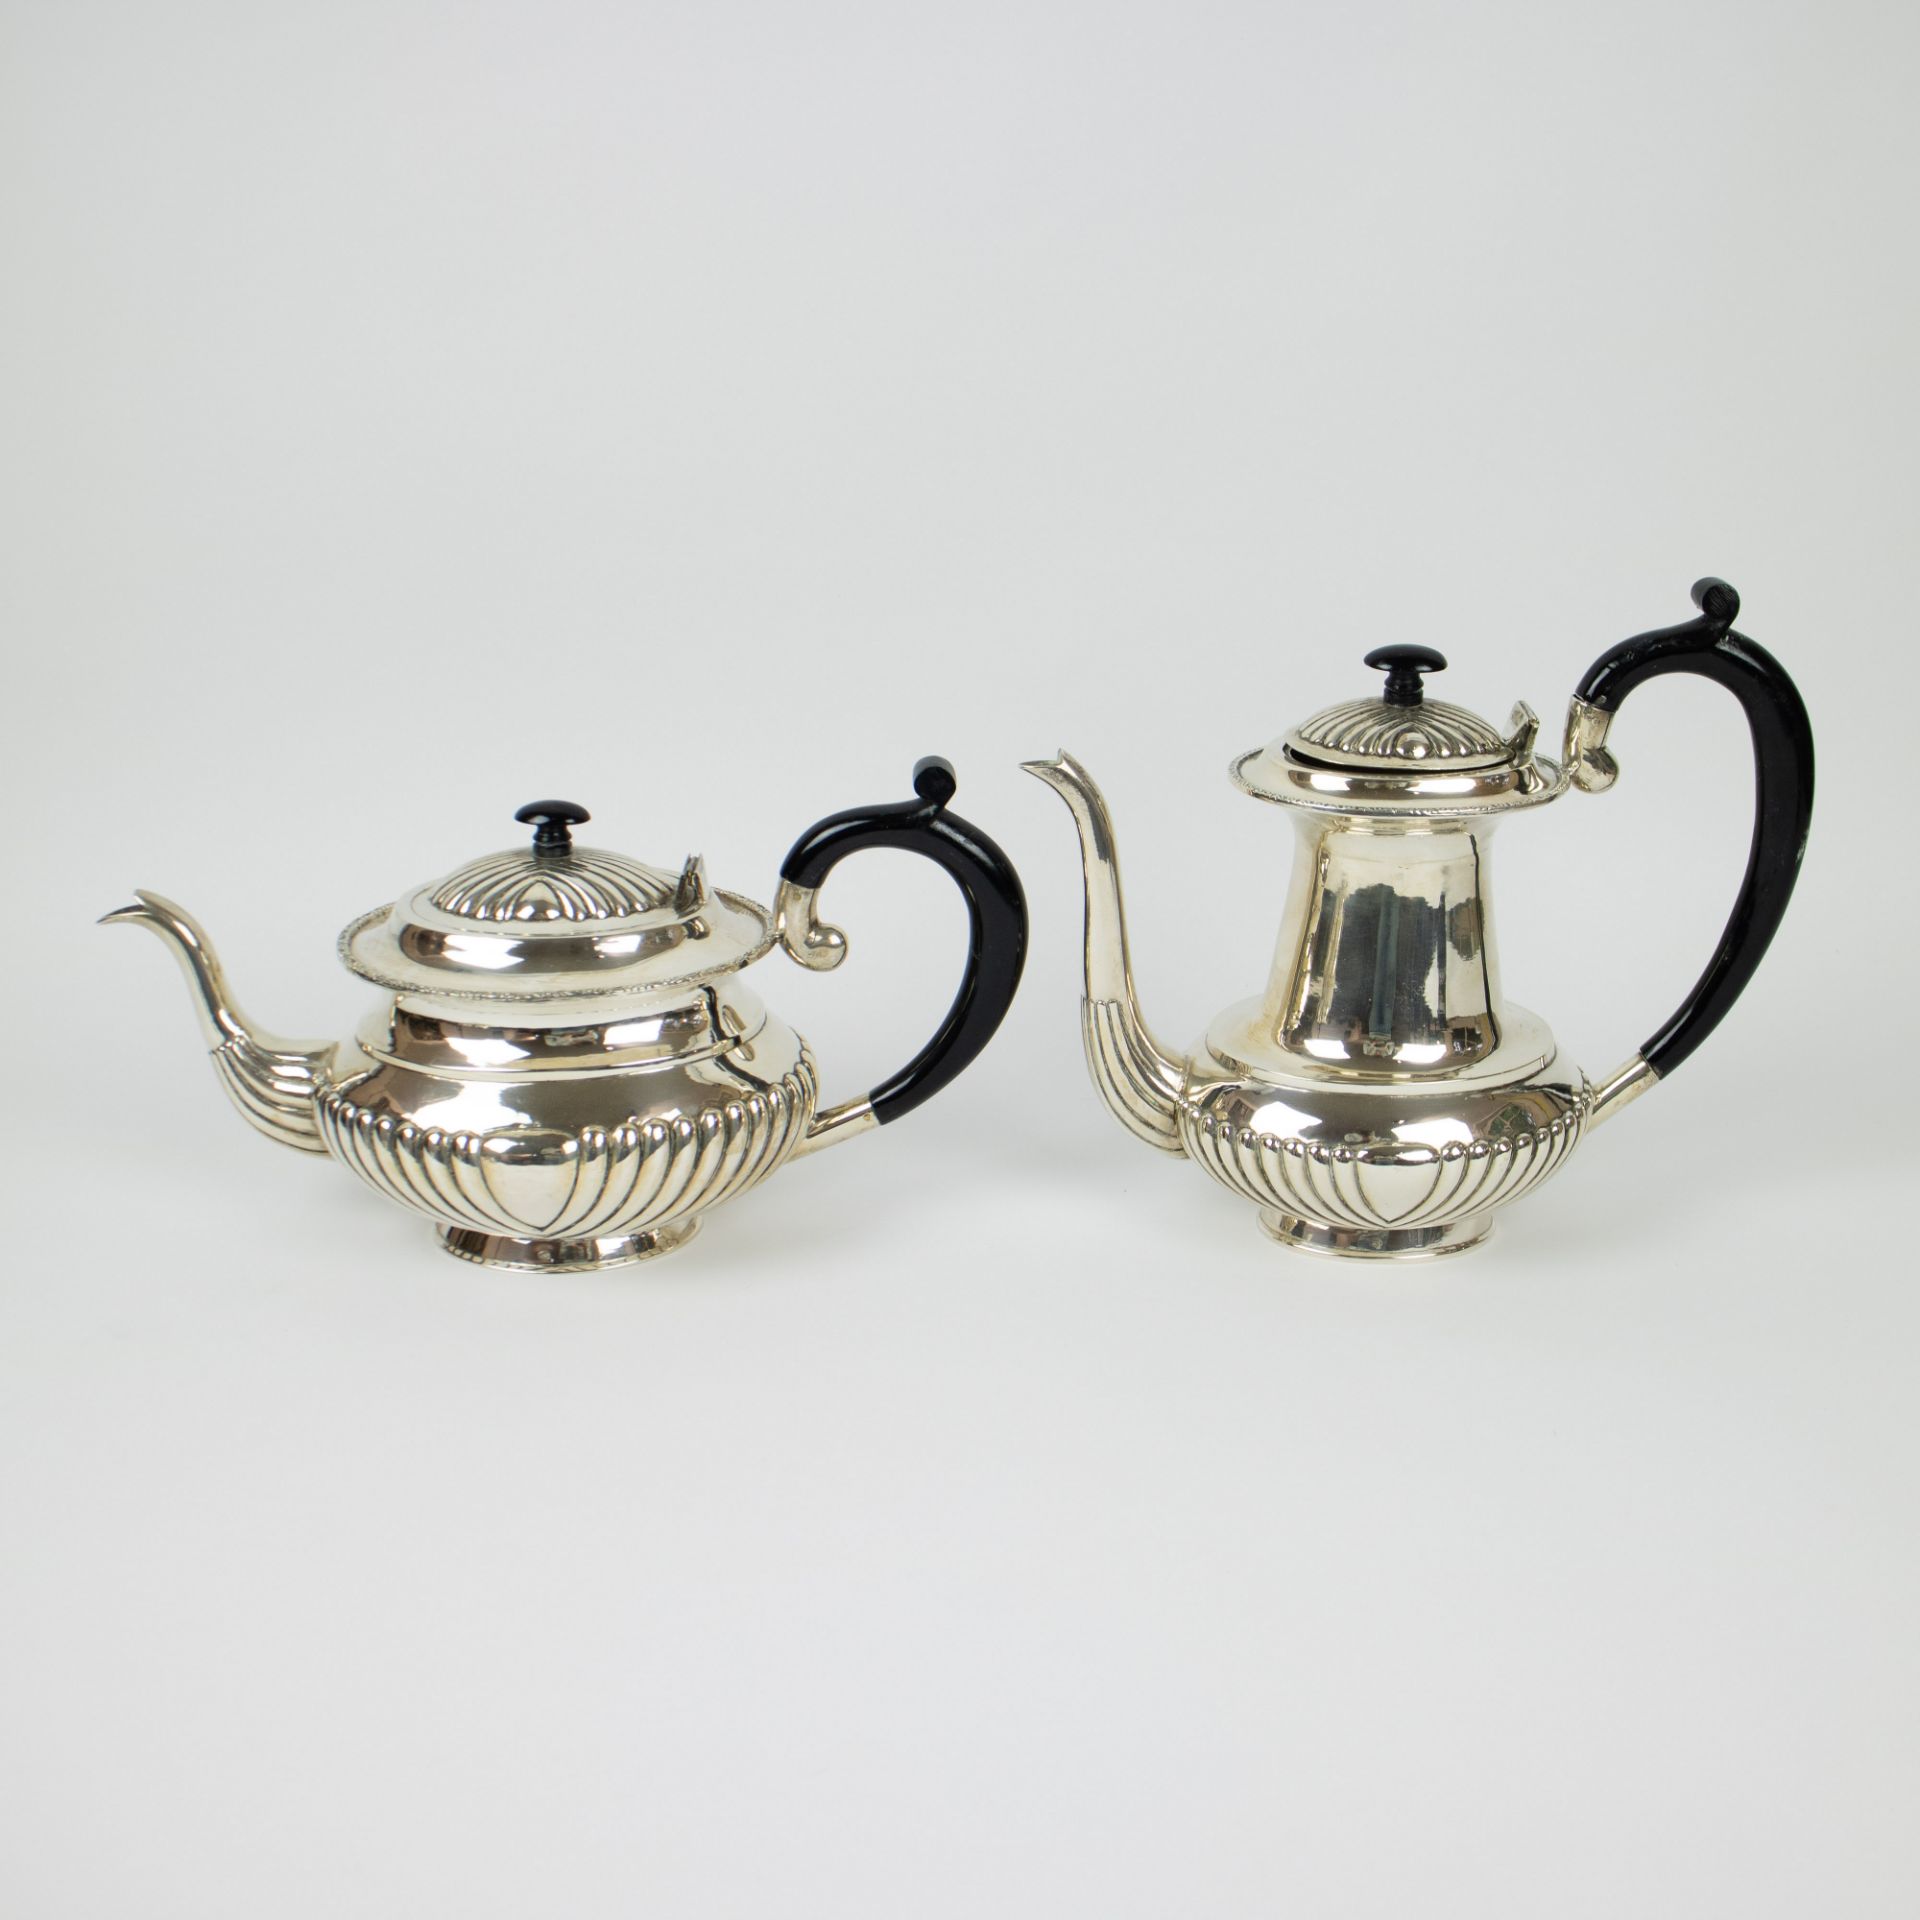 Silver coffee and tea set - Image 2 of 10